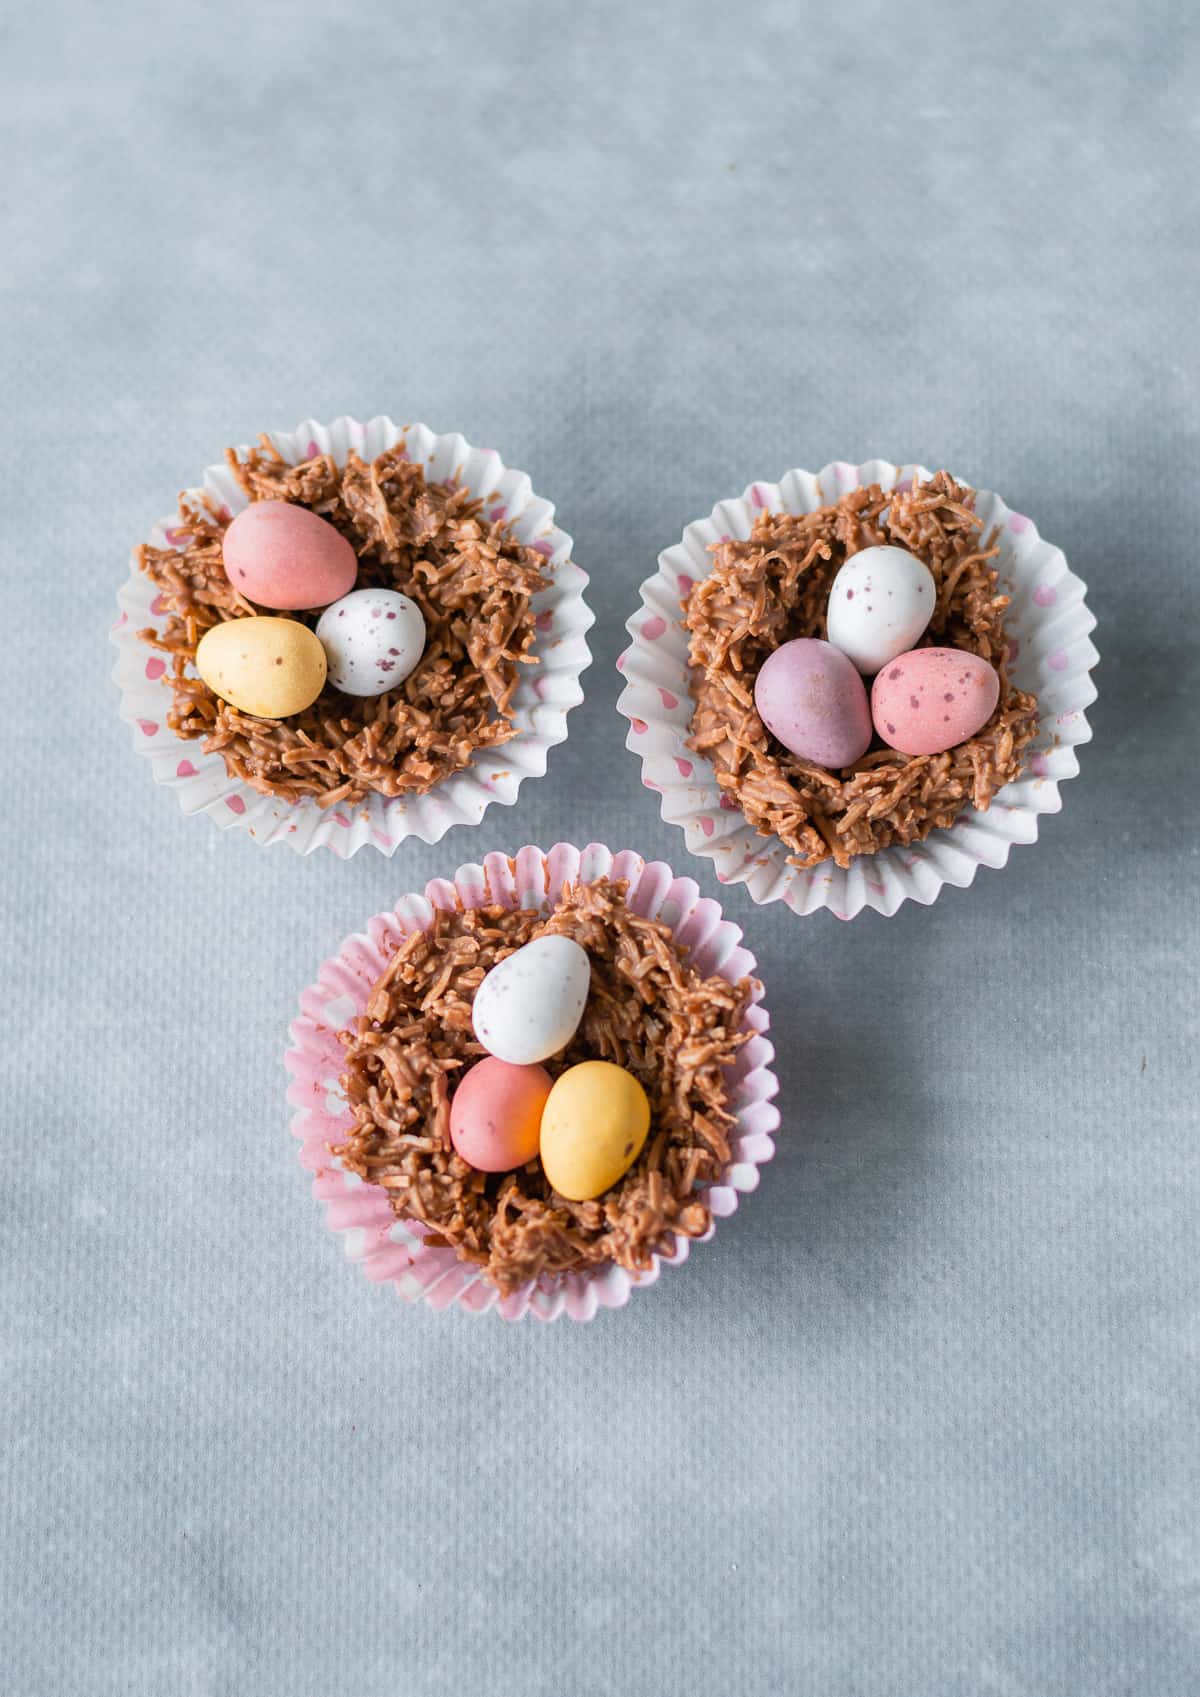 3 chocolate easter egg nests with small easter eggs